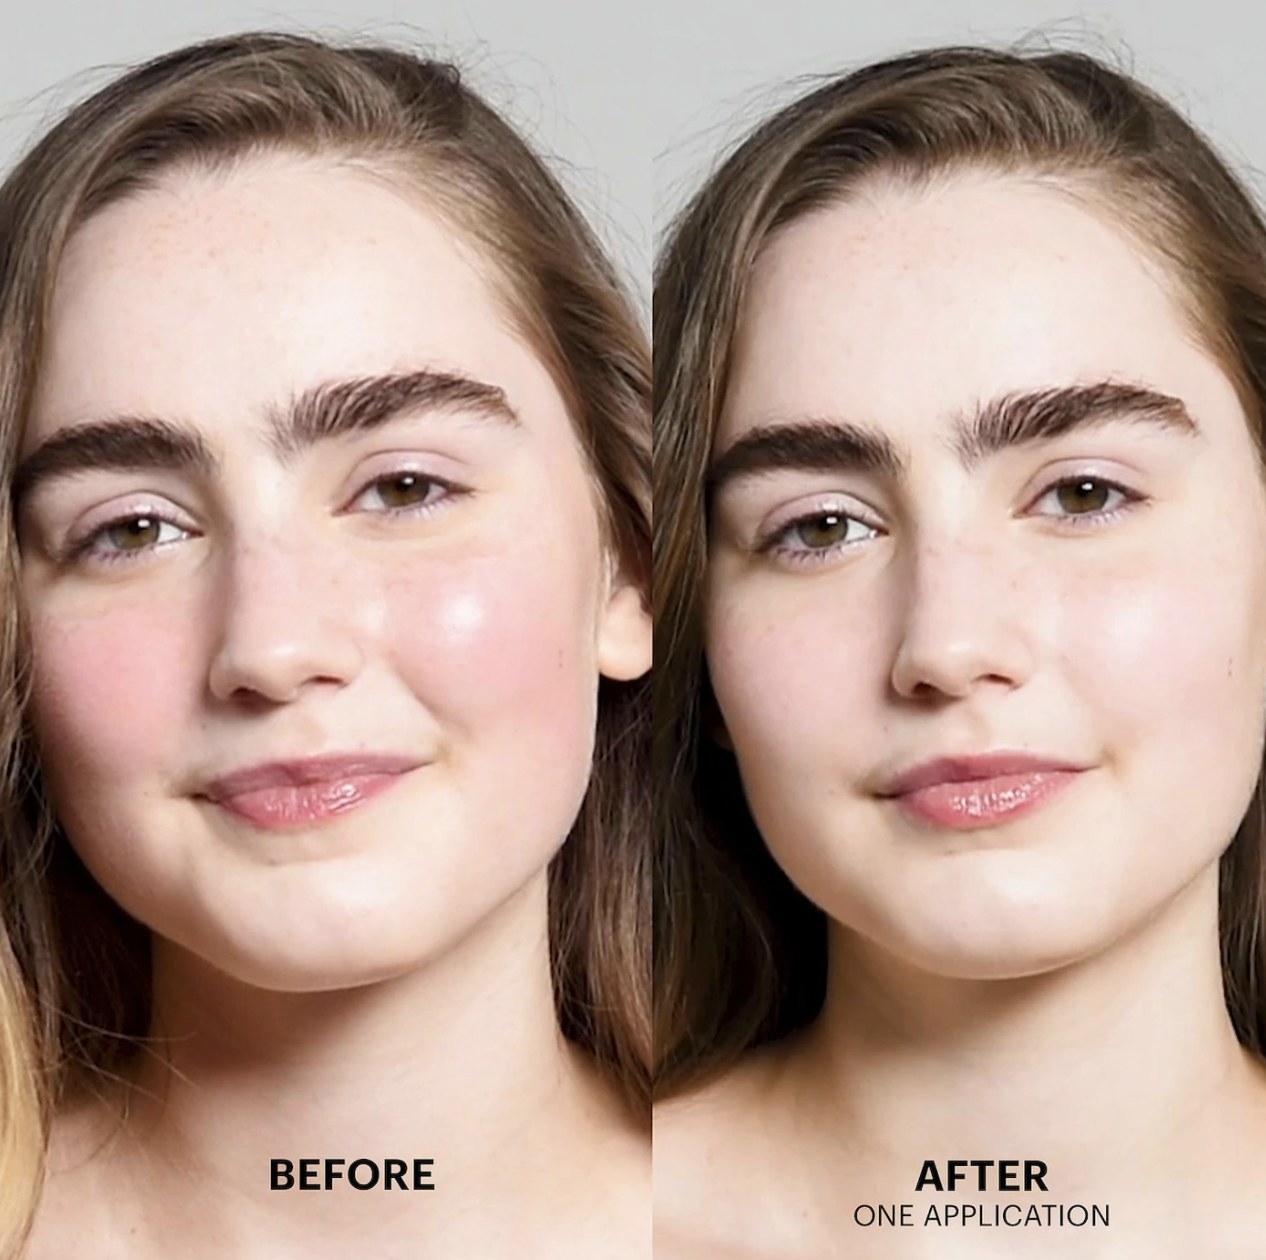 before and after showing model with red skin before and clear, even skin without redness after one application of the cream